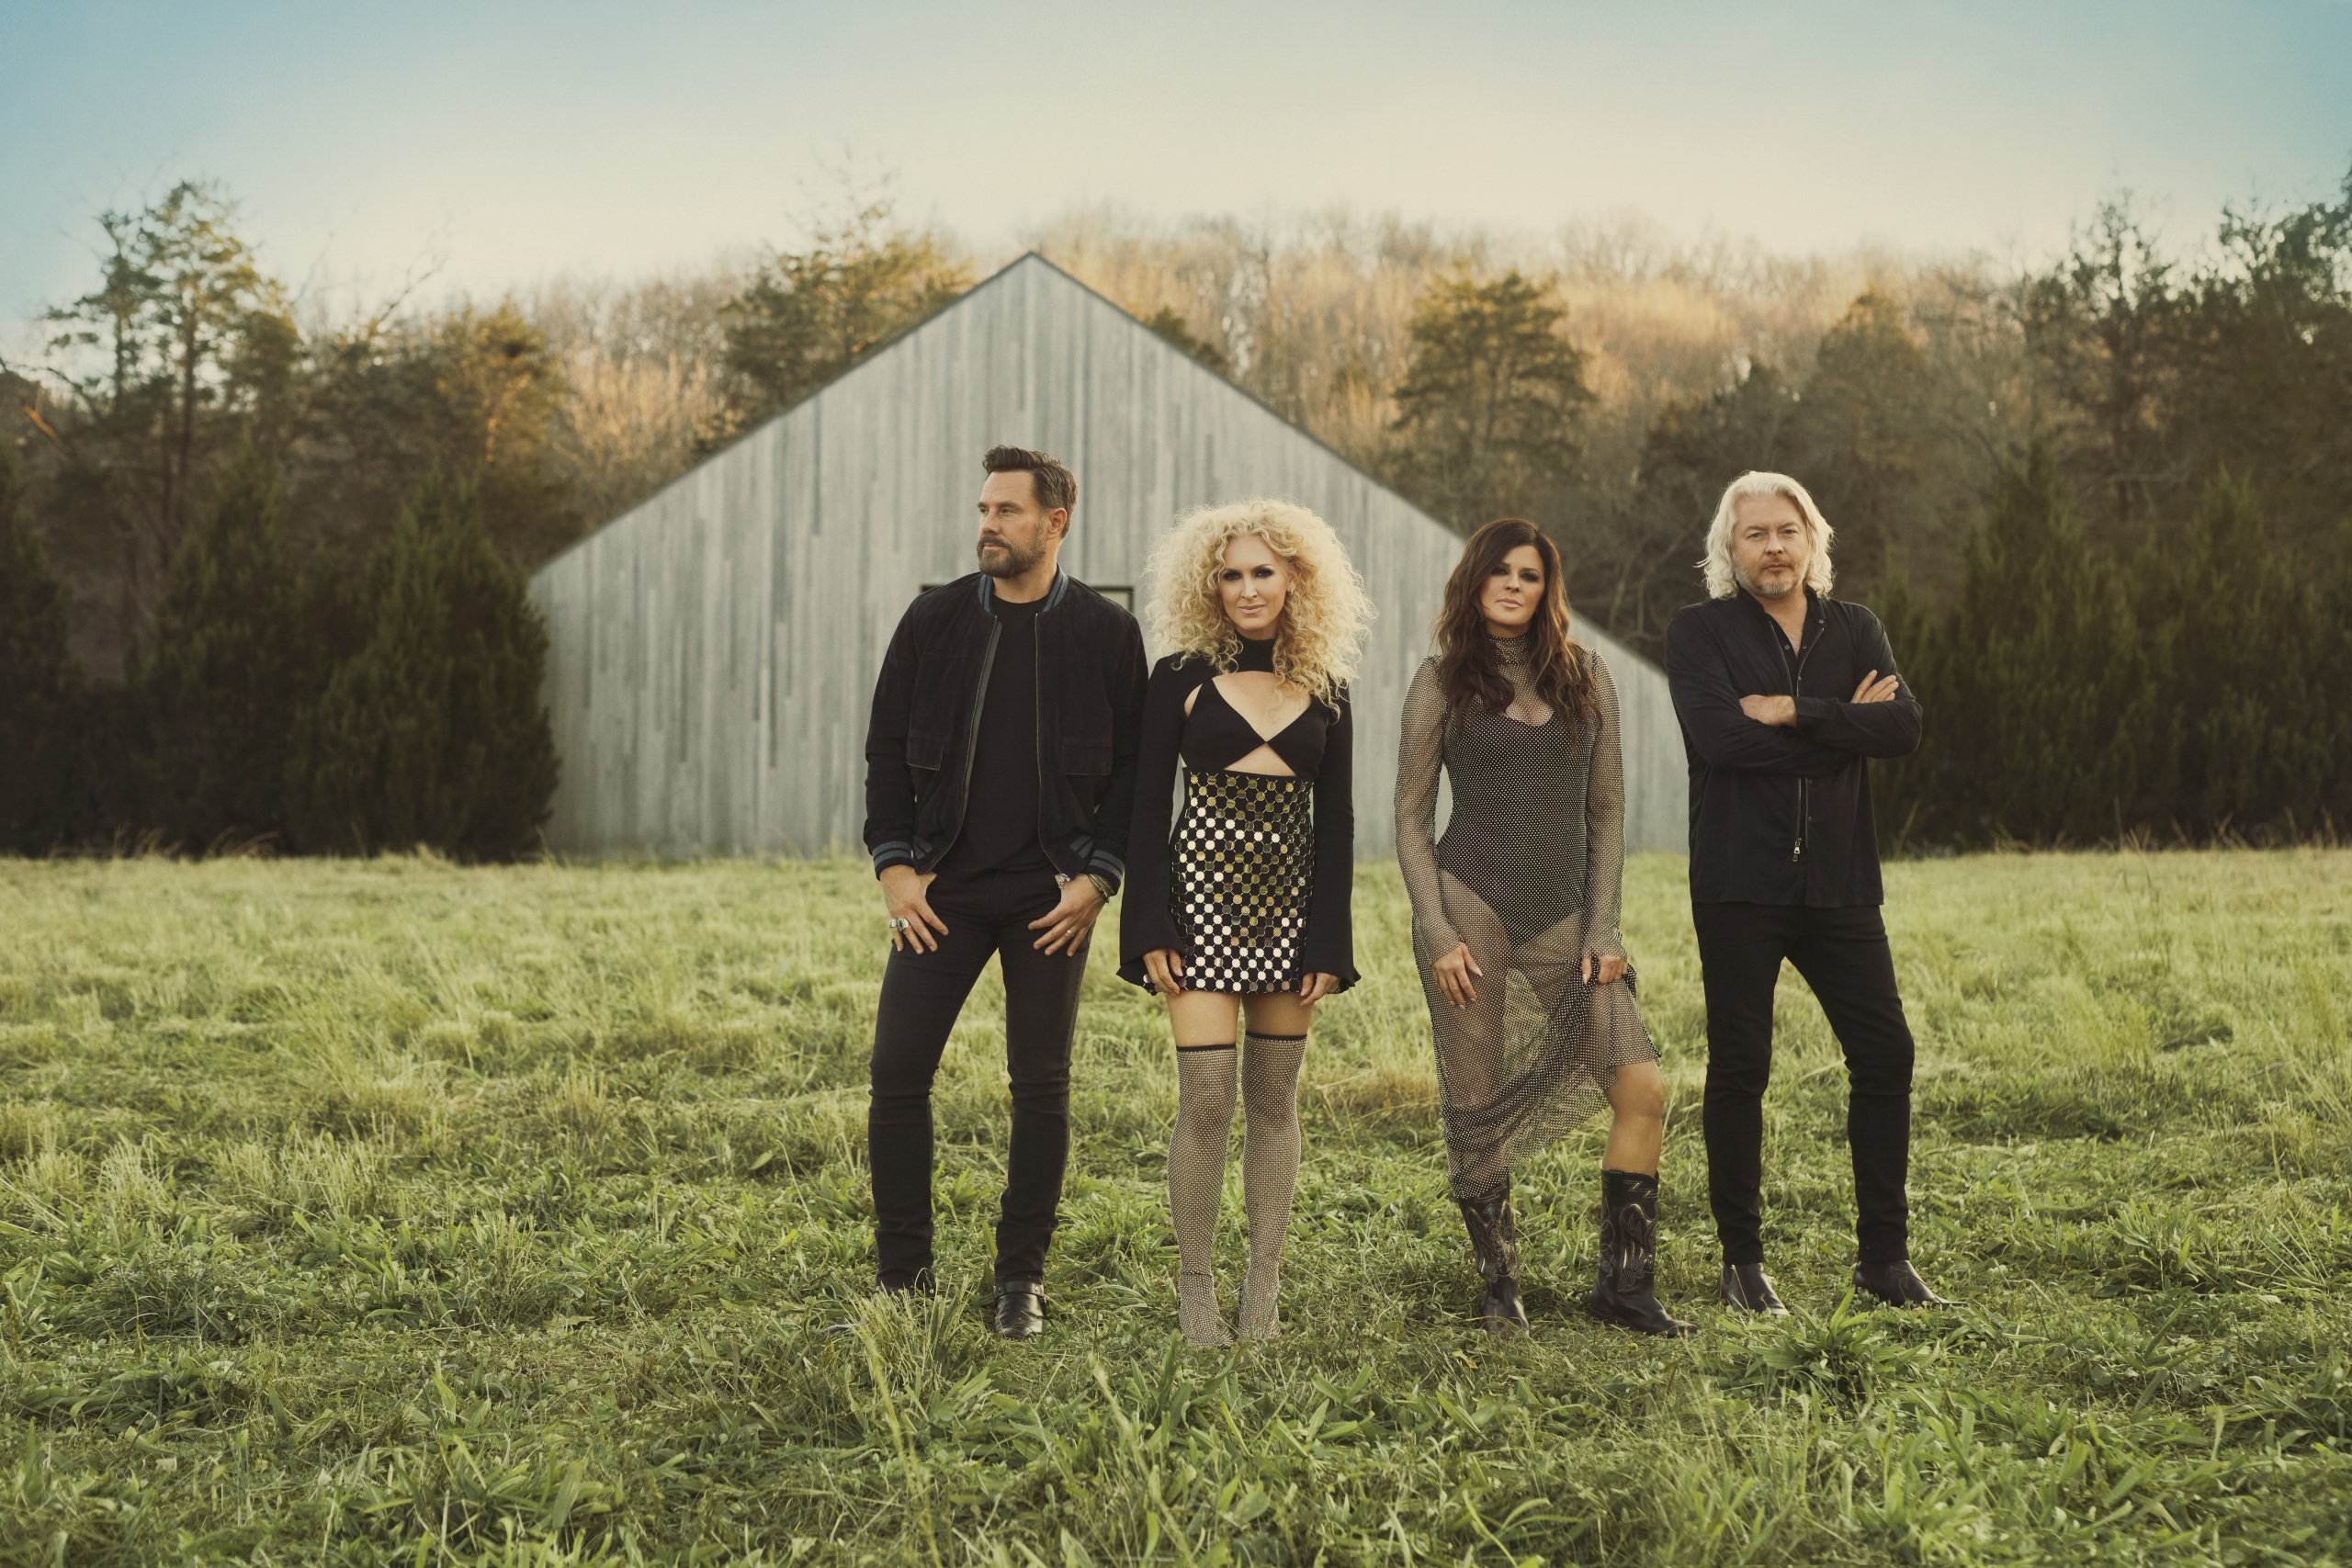 LITTLE BIG TOWN RELEASES NEW SONG “ALL SUMMER” FROM UPCOMING NEW ALBUM.